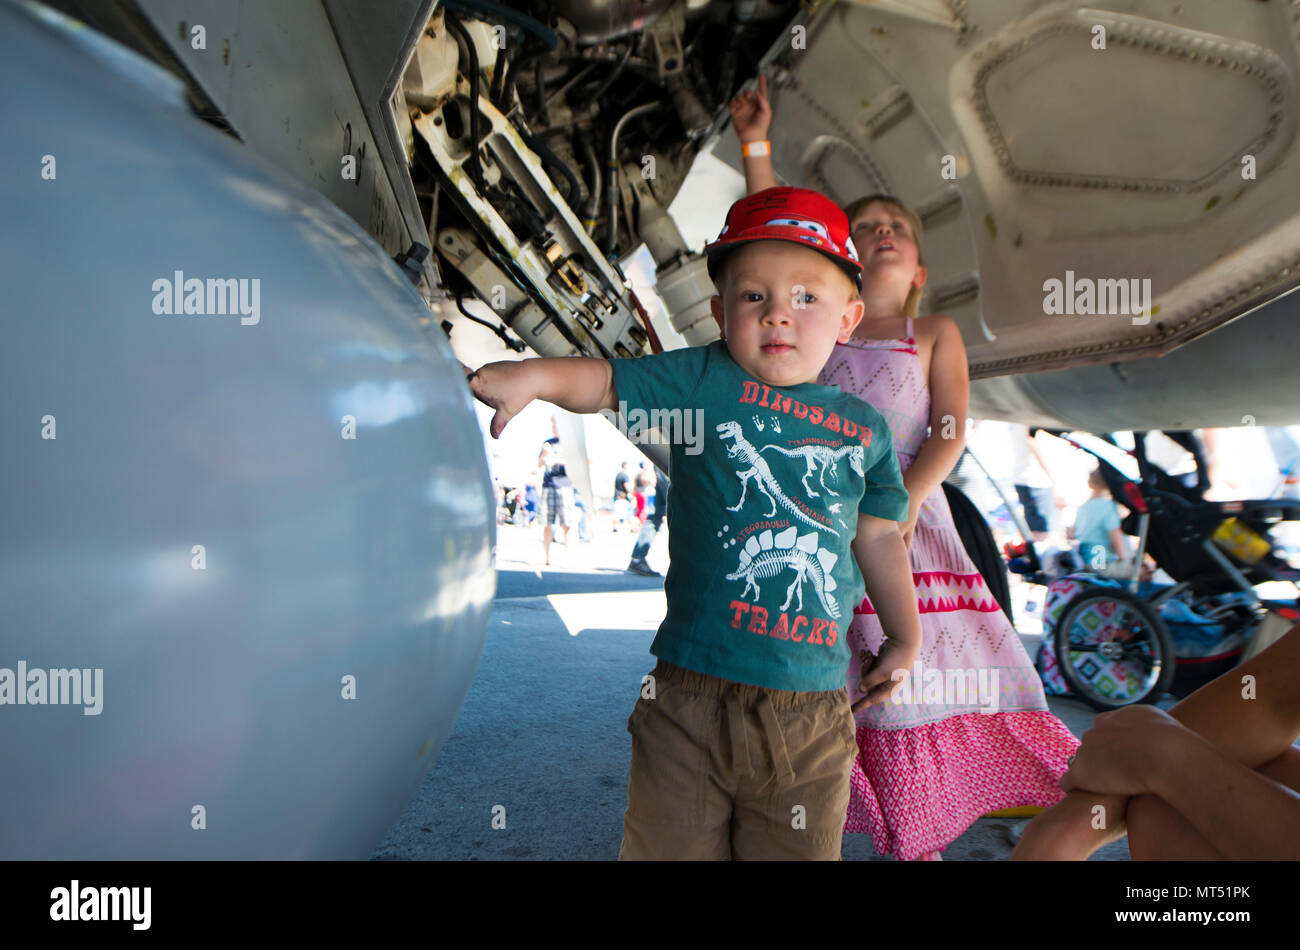 A child touches an aircraft during SkyFest 2017 Air Show and Open House at Fairchild Air Force Base, Washington, July 30, 2017. SkyFest was hosted  to thank the local and regional community for their support and give them the opportunity to meet Airmen and learn about the Air Force mission. (U.S. Air Force photo/Senior Airman Janelle Patiño) Stock Photo